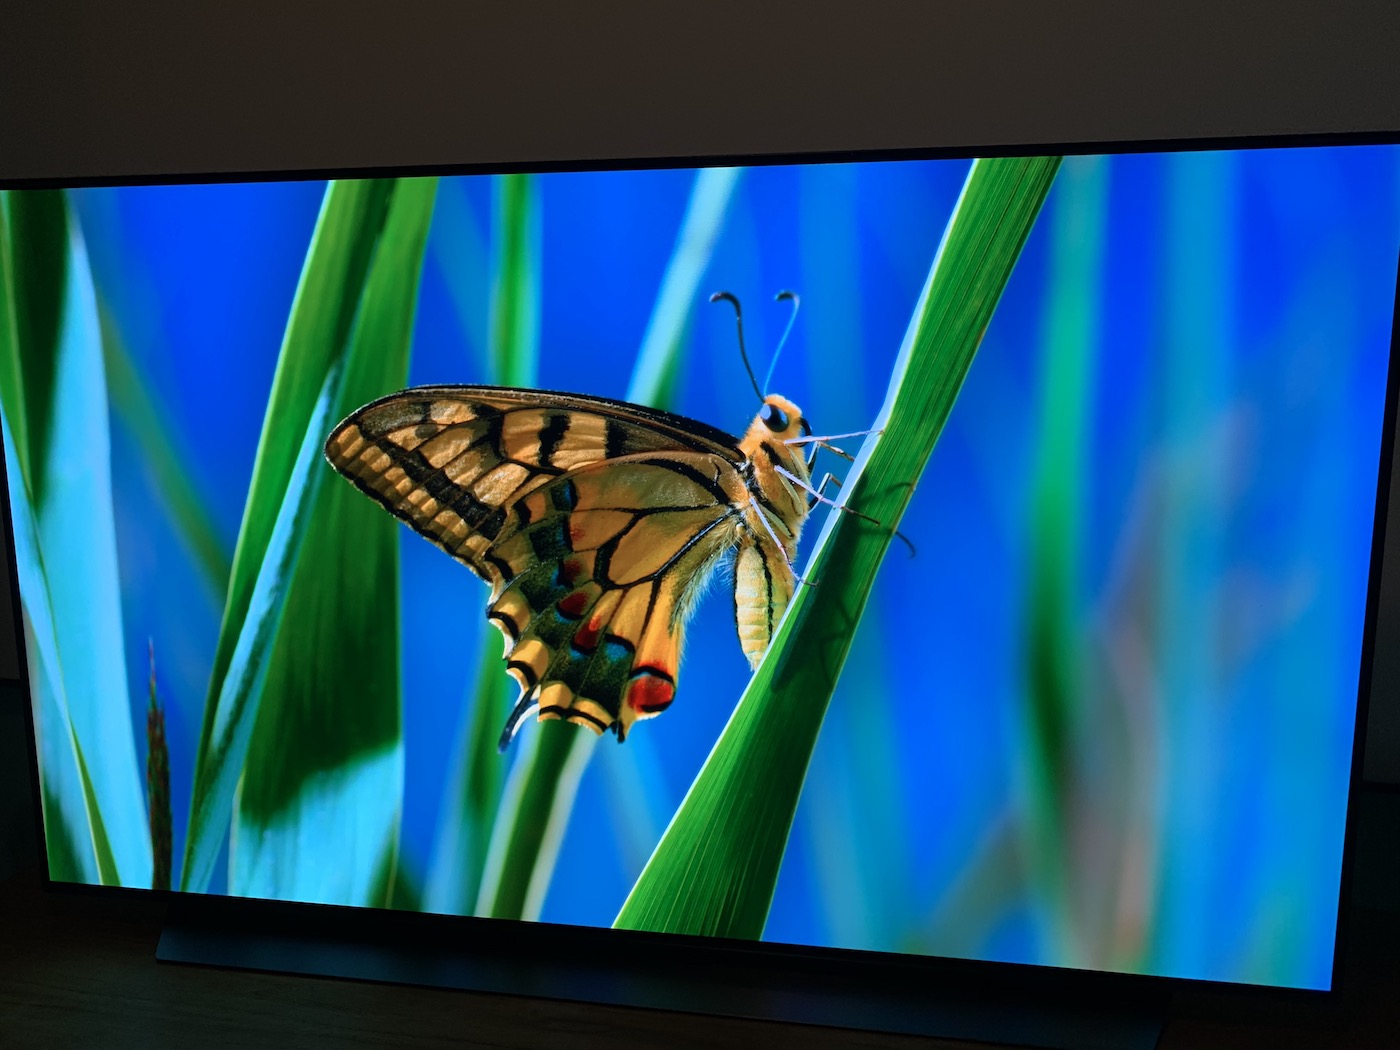 LG C9 OLED 4K TV - screen is showing a butterfly